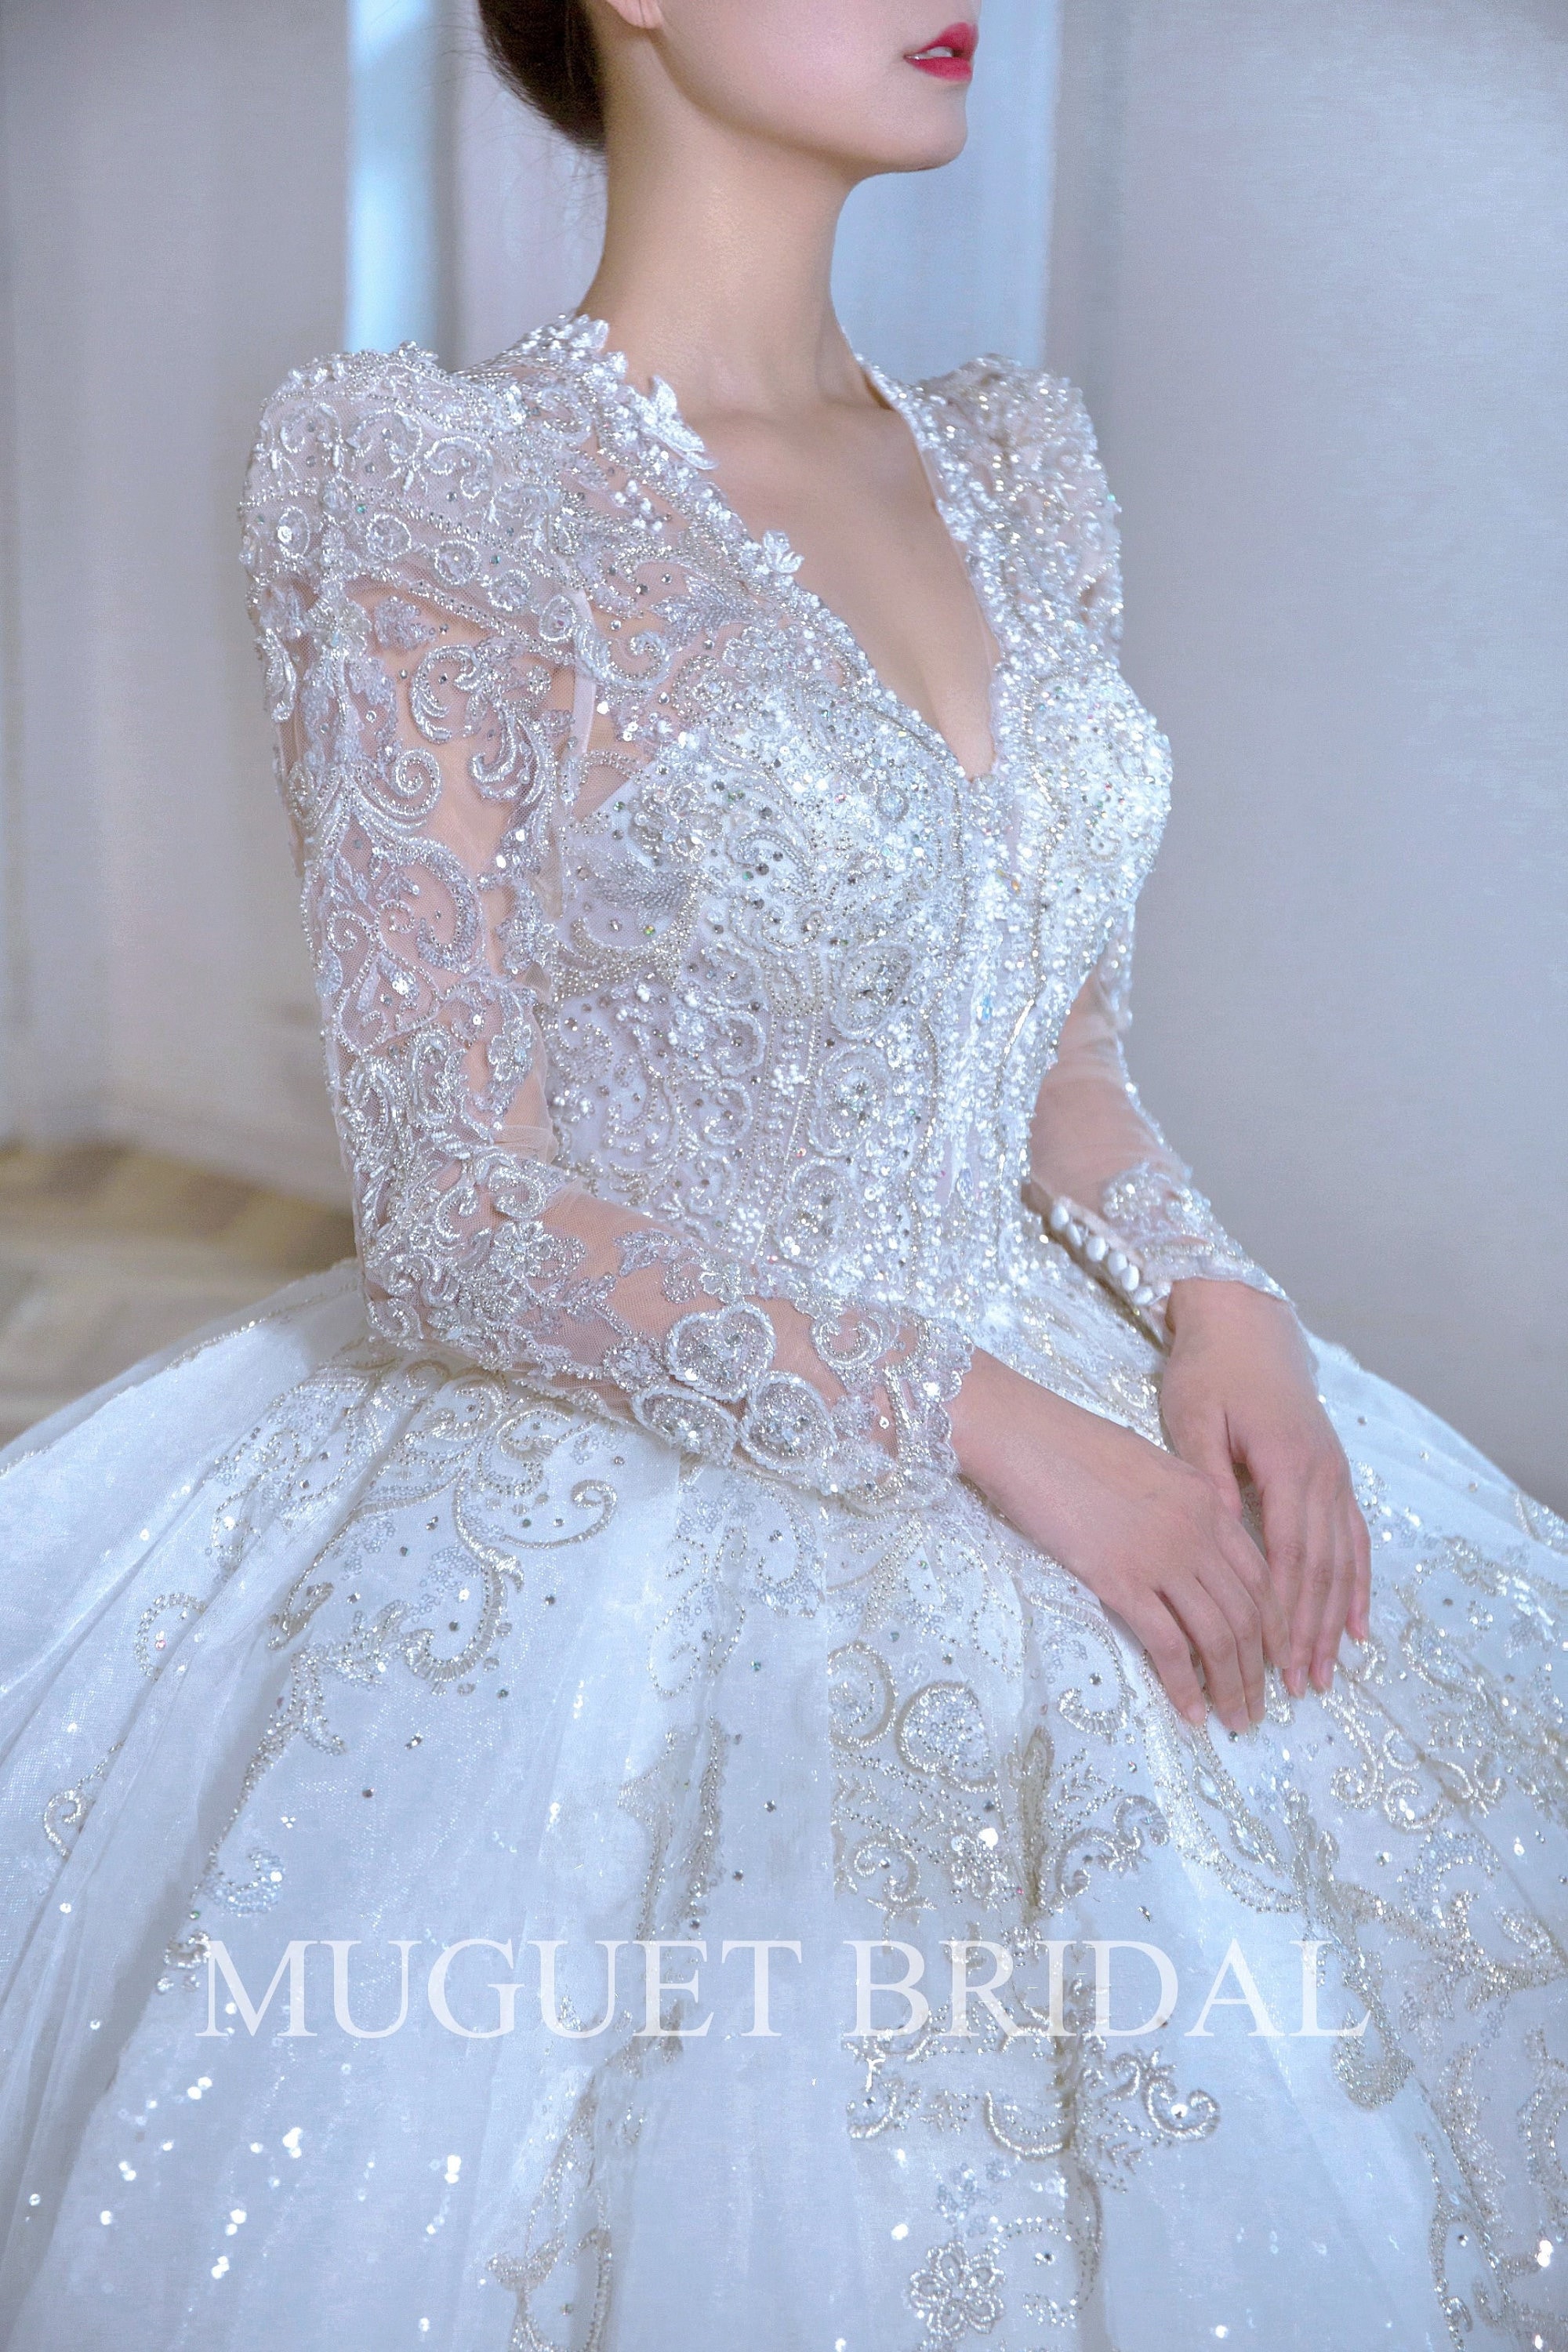 Long Sleeve Lace Ball Gown Wedding Dress With Open Back | Kleinfeld Bridal